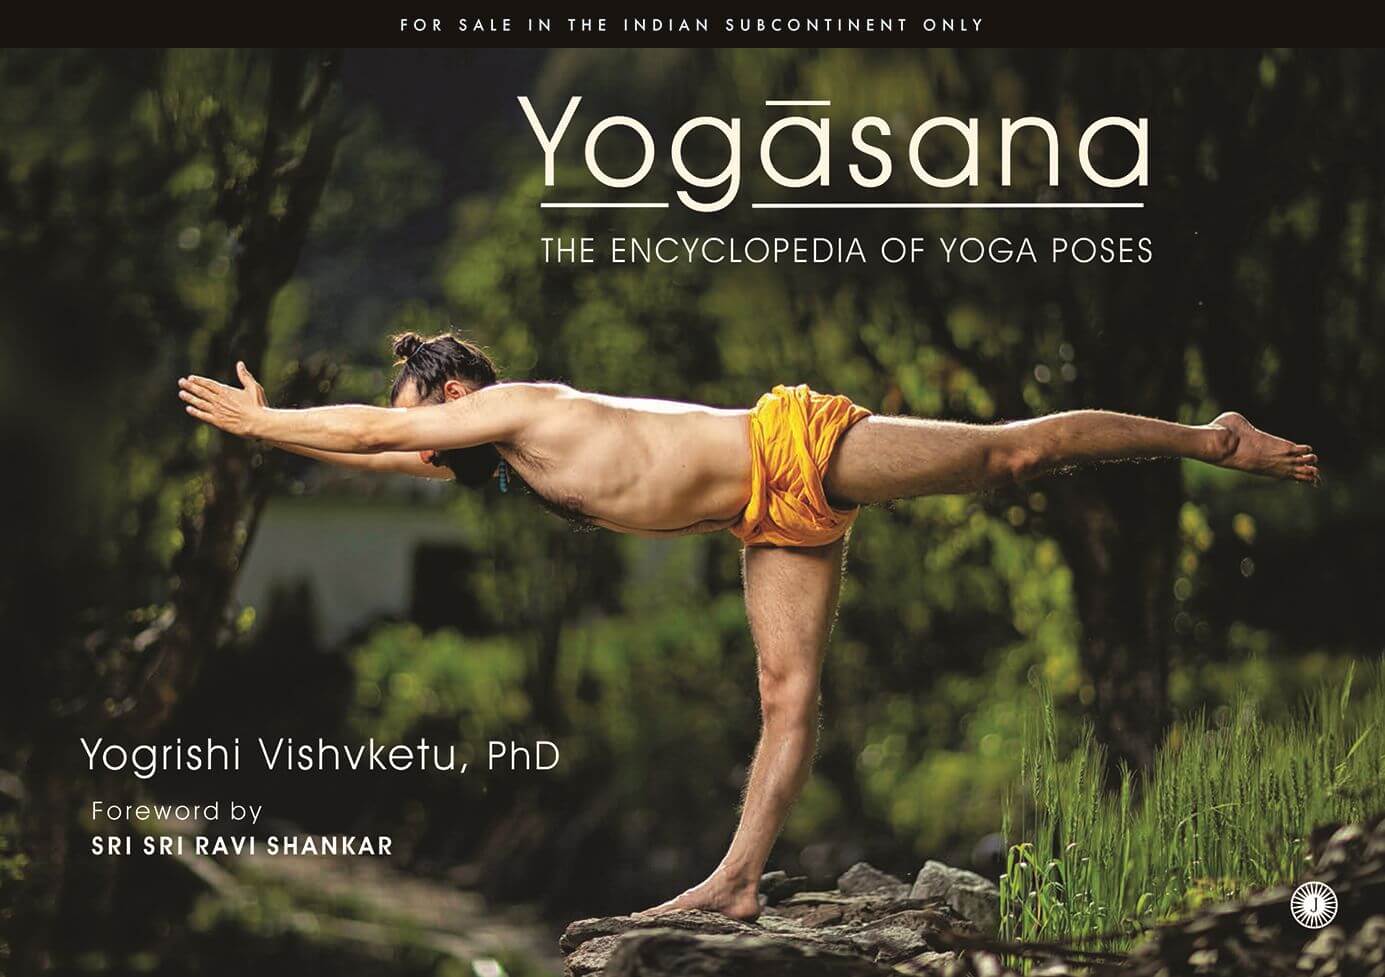 Yoga Journal's Complete Beginners Guide with Pose Encyclopedia 94922310552  | eBay